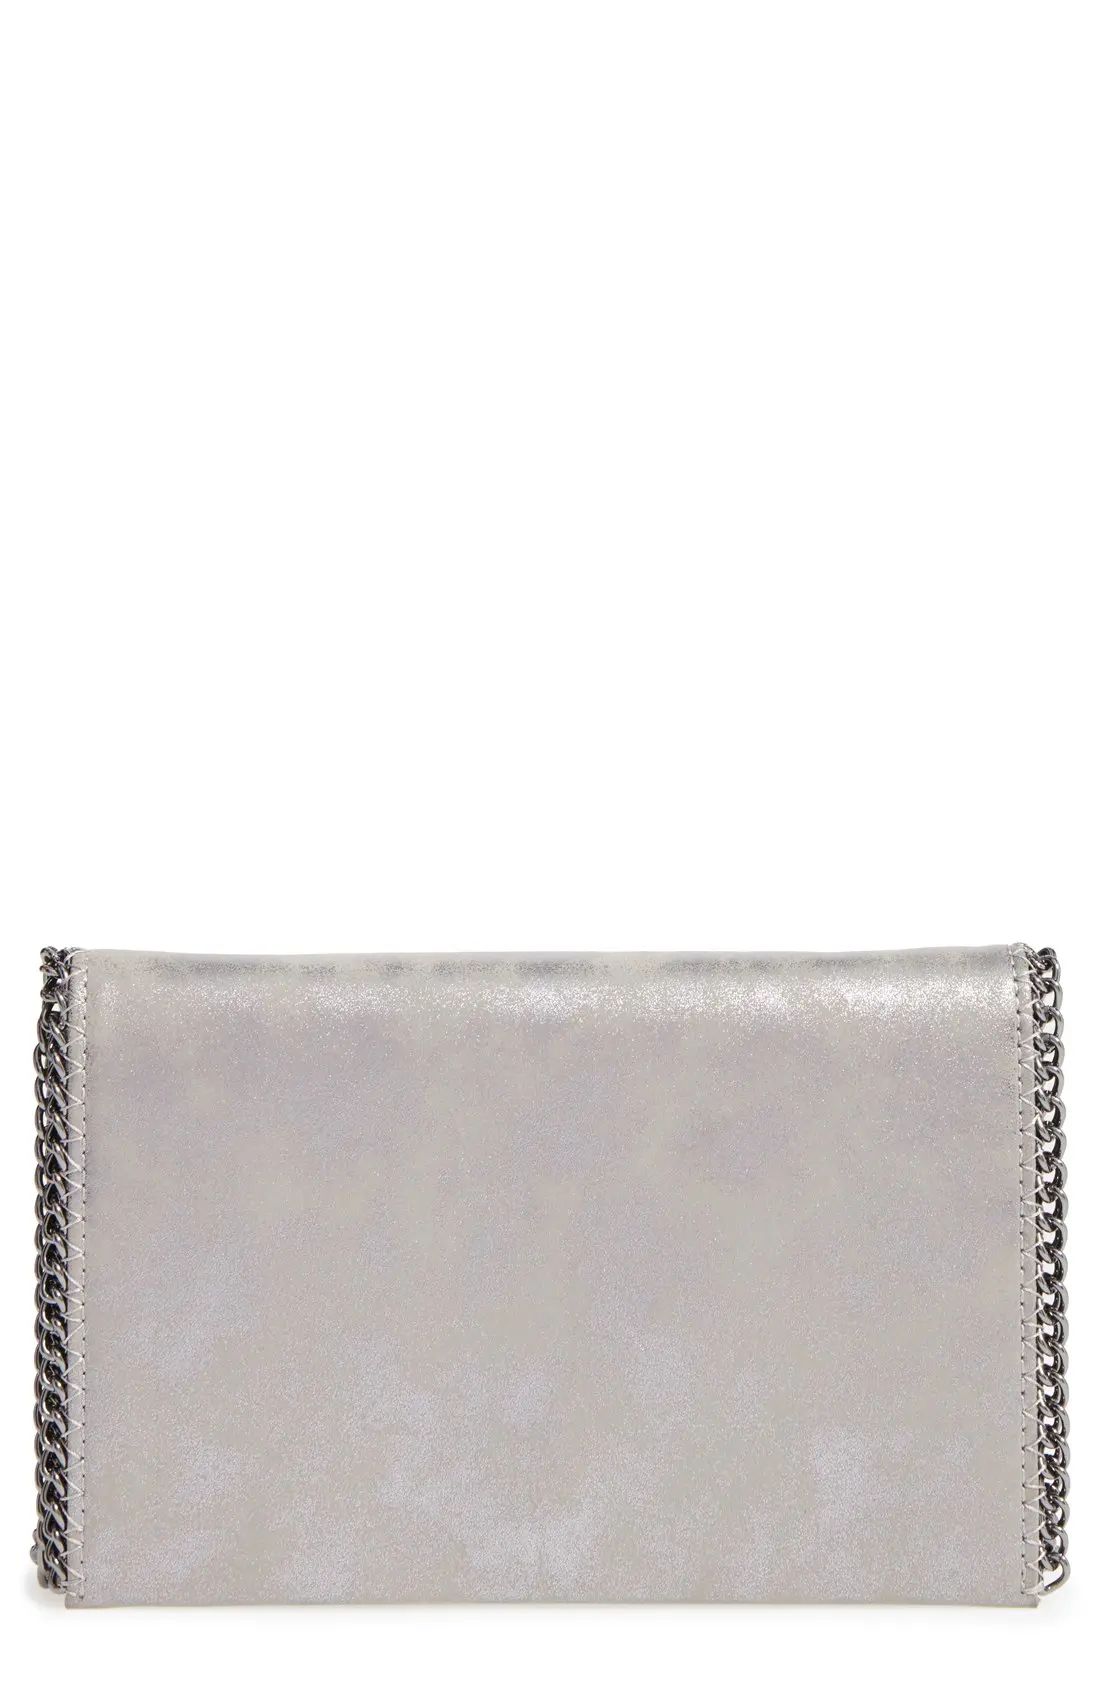 Faux Leather Clutch | Nordstrom